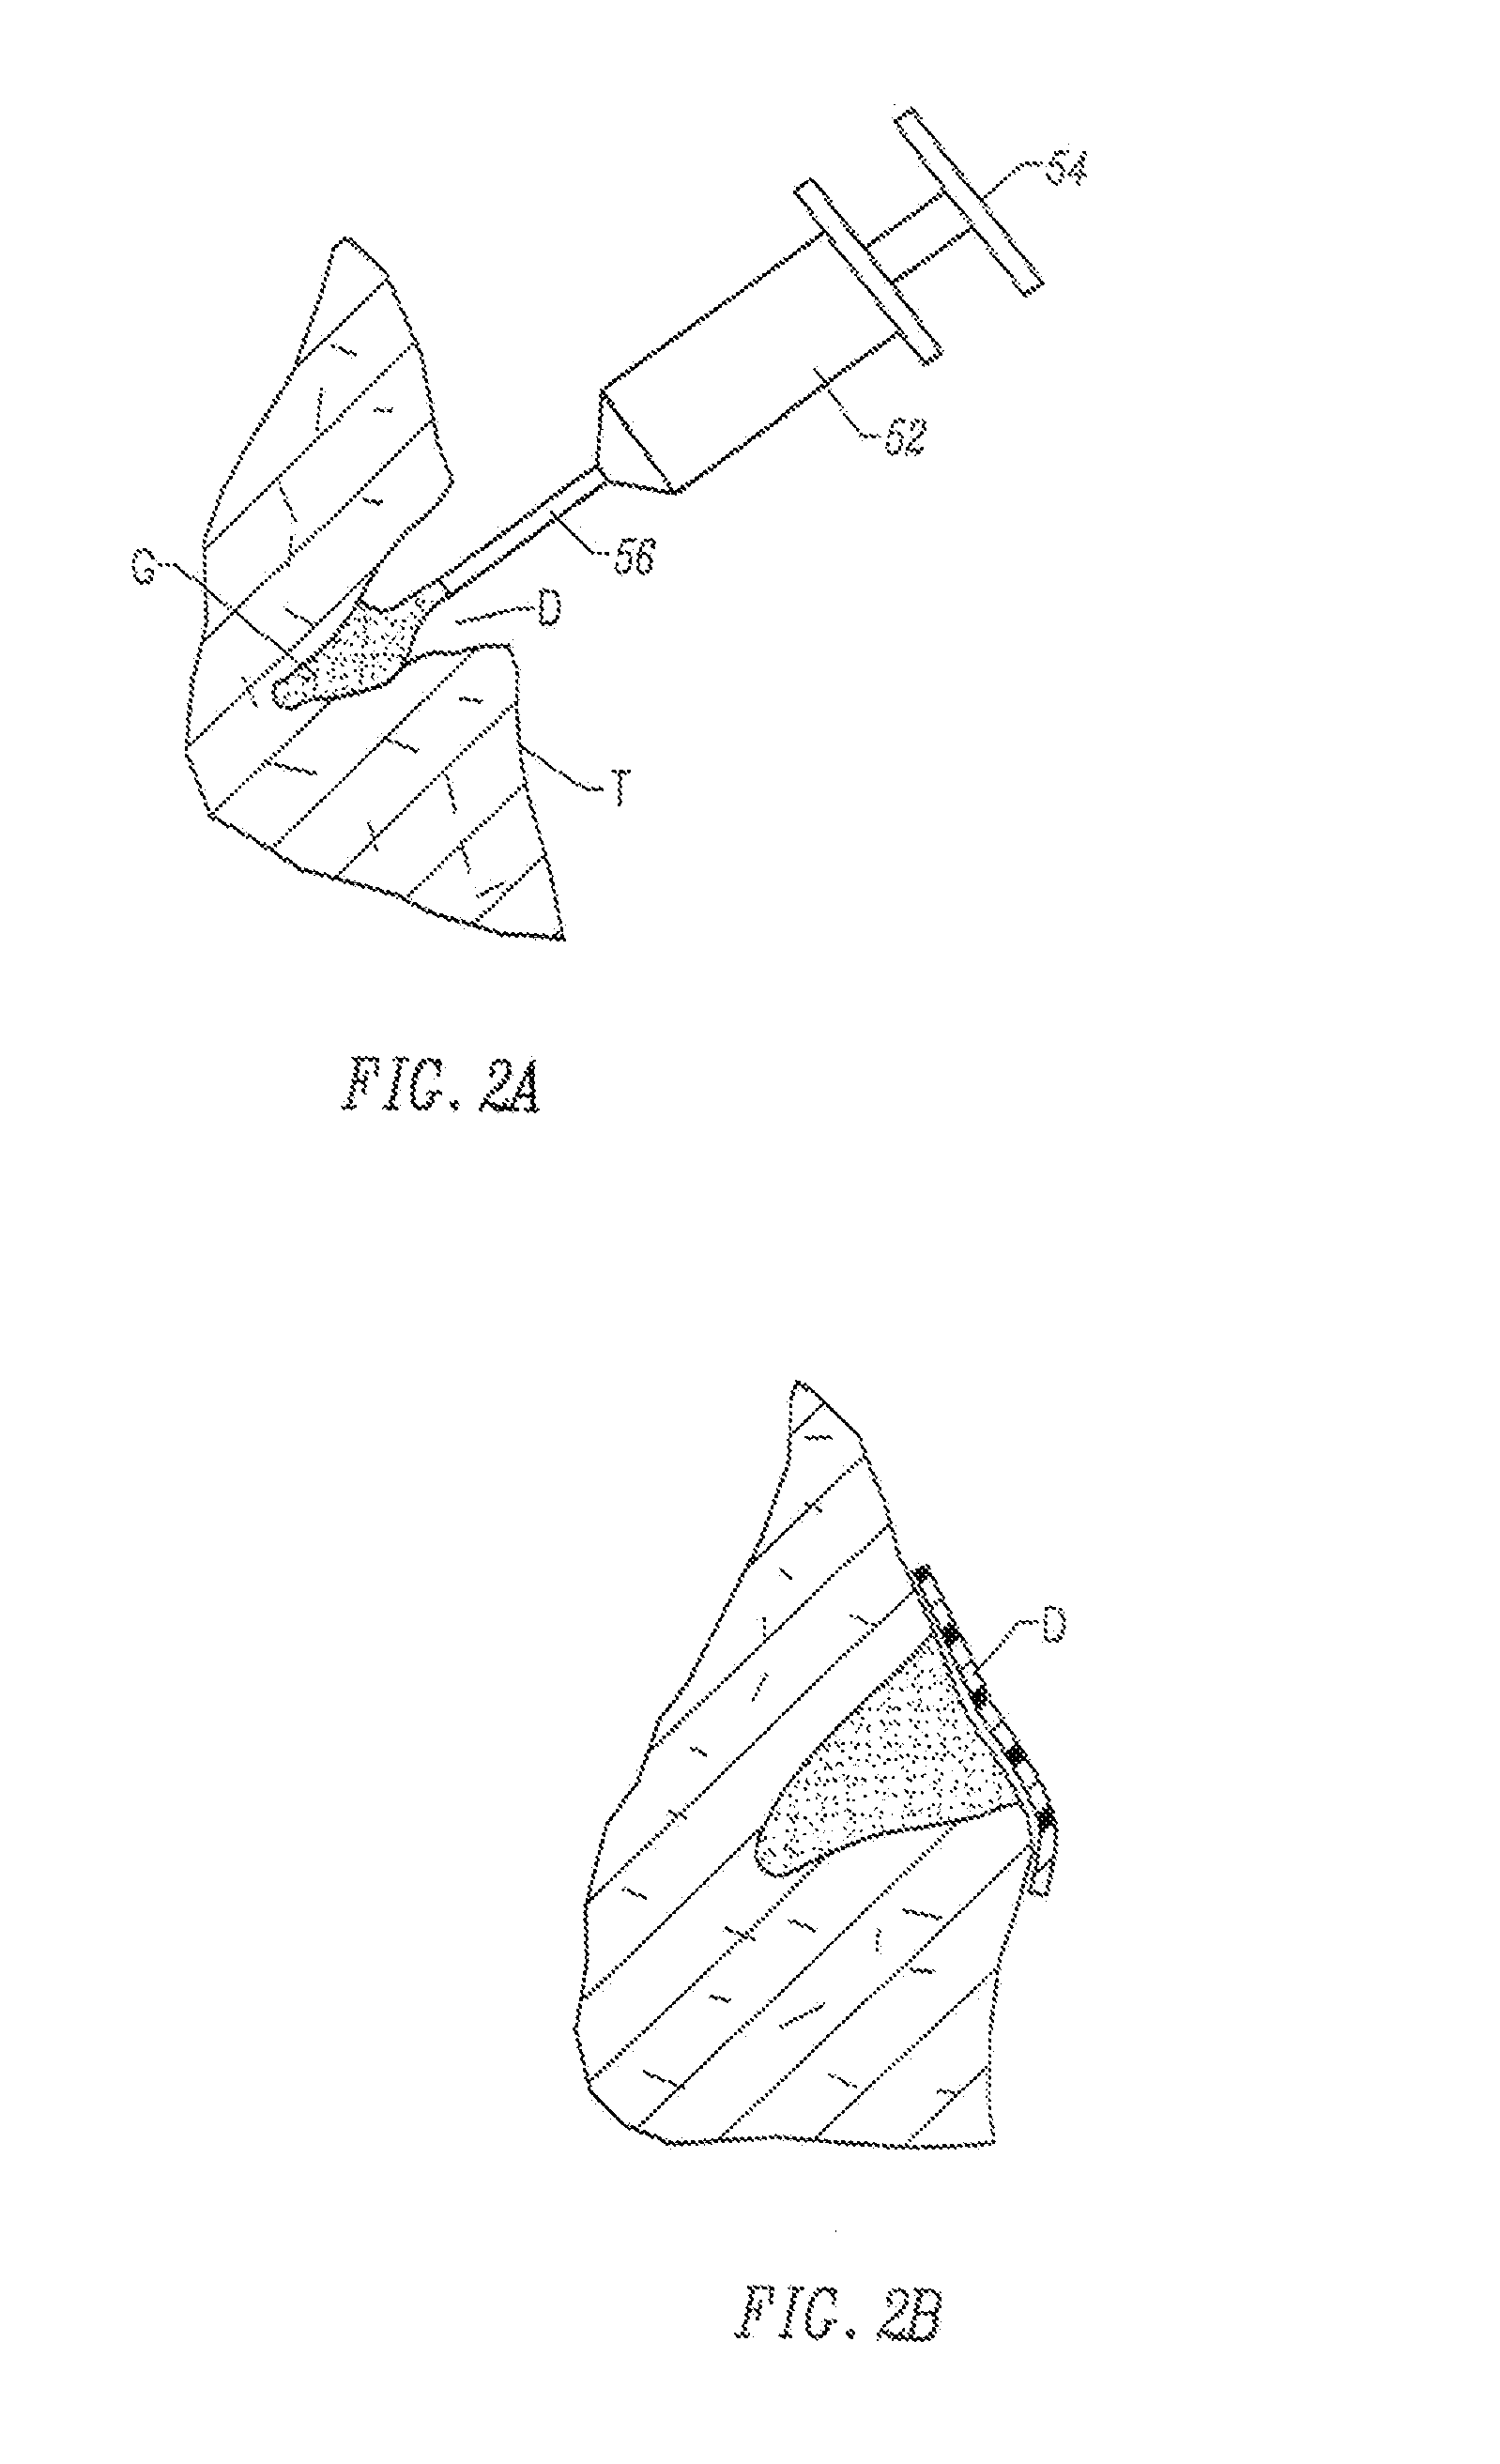 Fragmented polymeric compositions and methods for their use